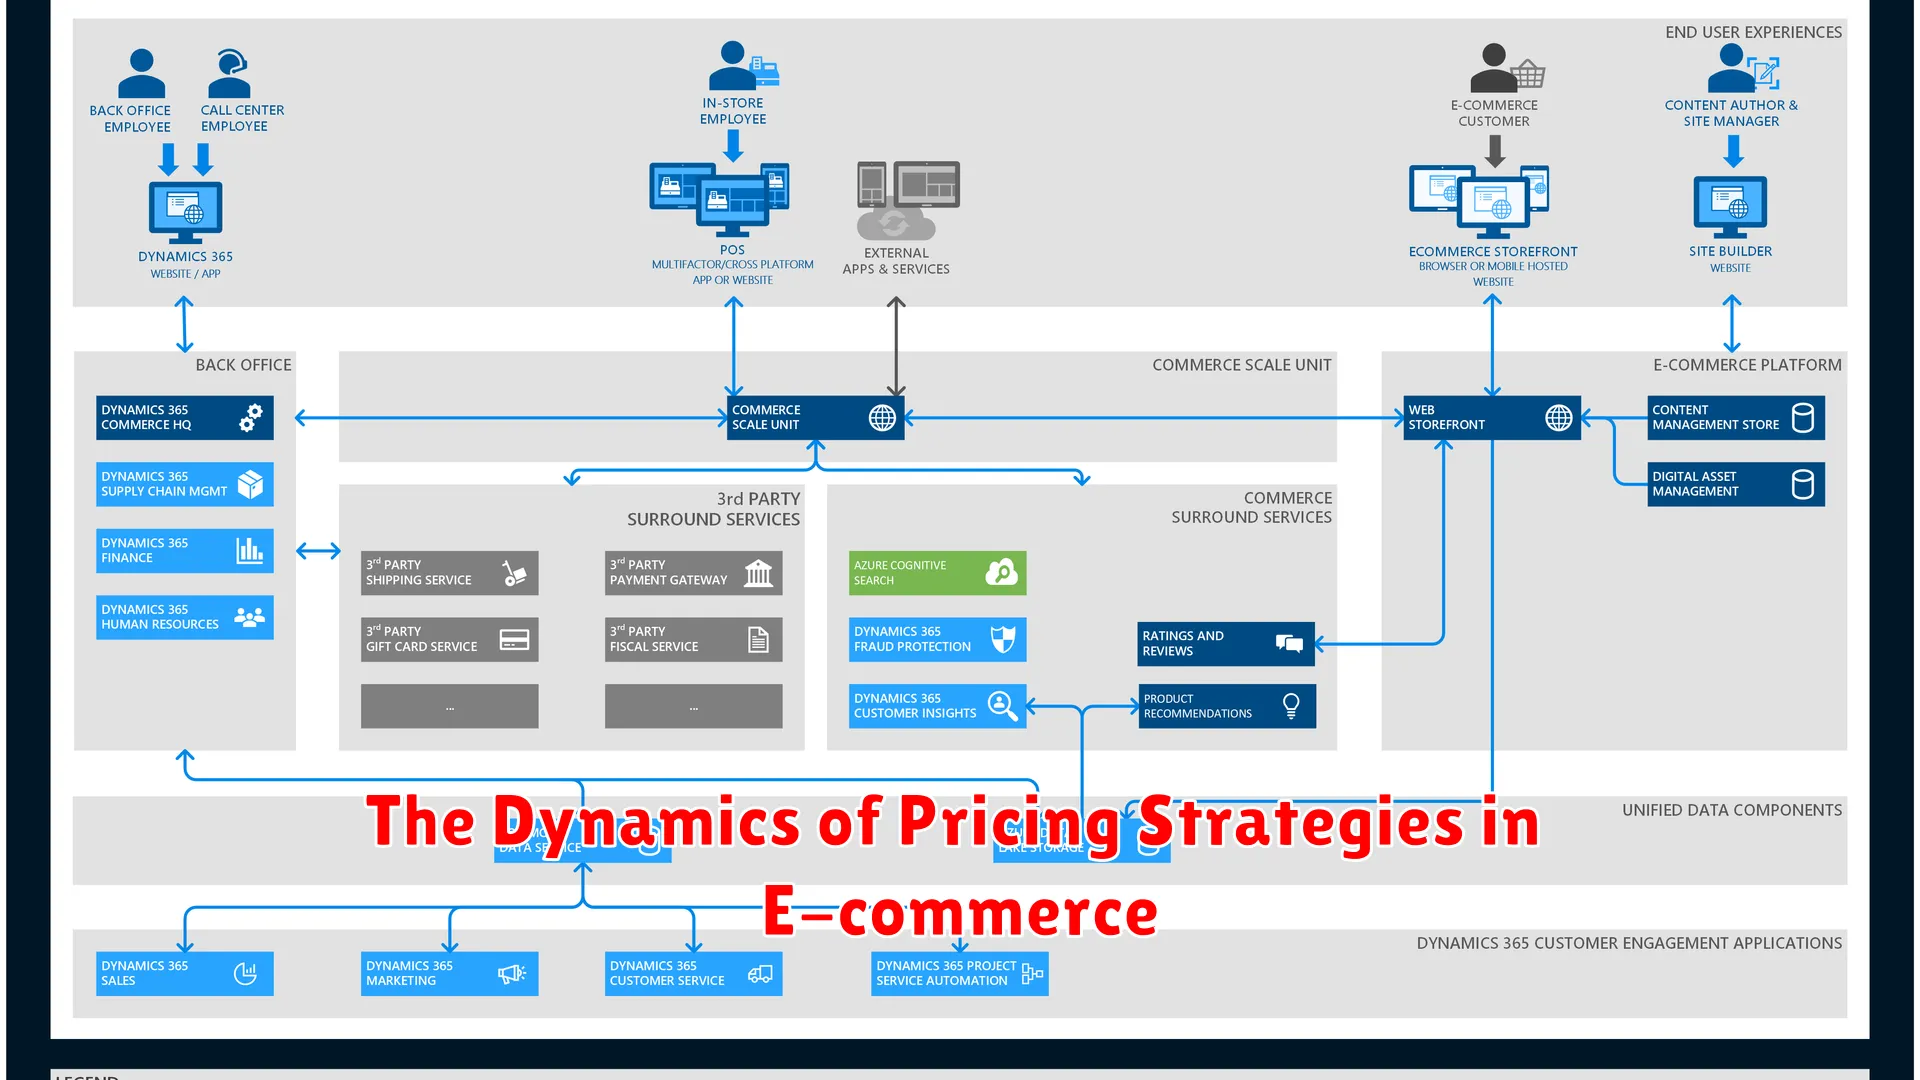 The Dynamics of Pricing Strategies in E-commerce